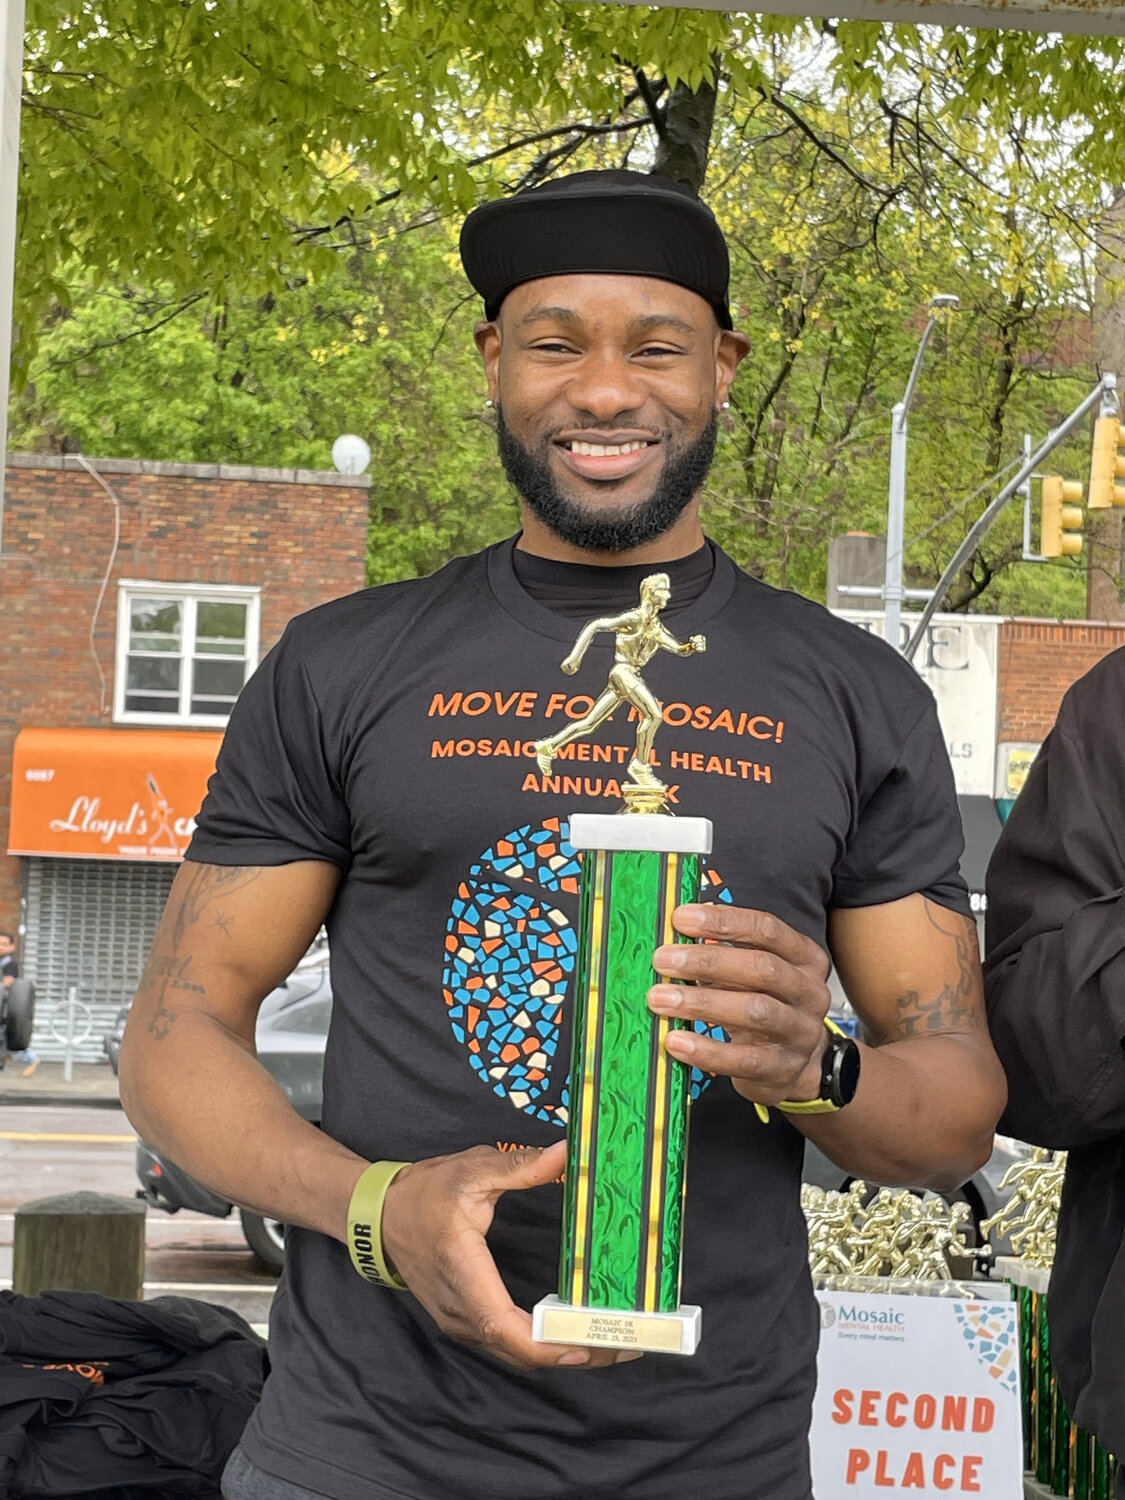 Chester Black, 37, of Brooklyn was the overall champion in the men's division of the annual Mosaic Mental Health 5K walk/run with a time of 20:53.7.